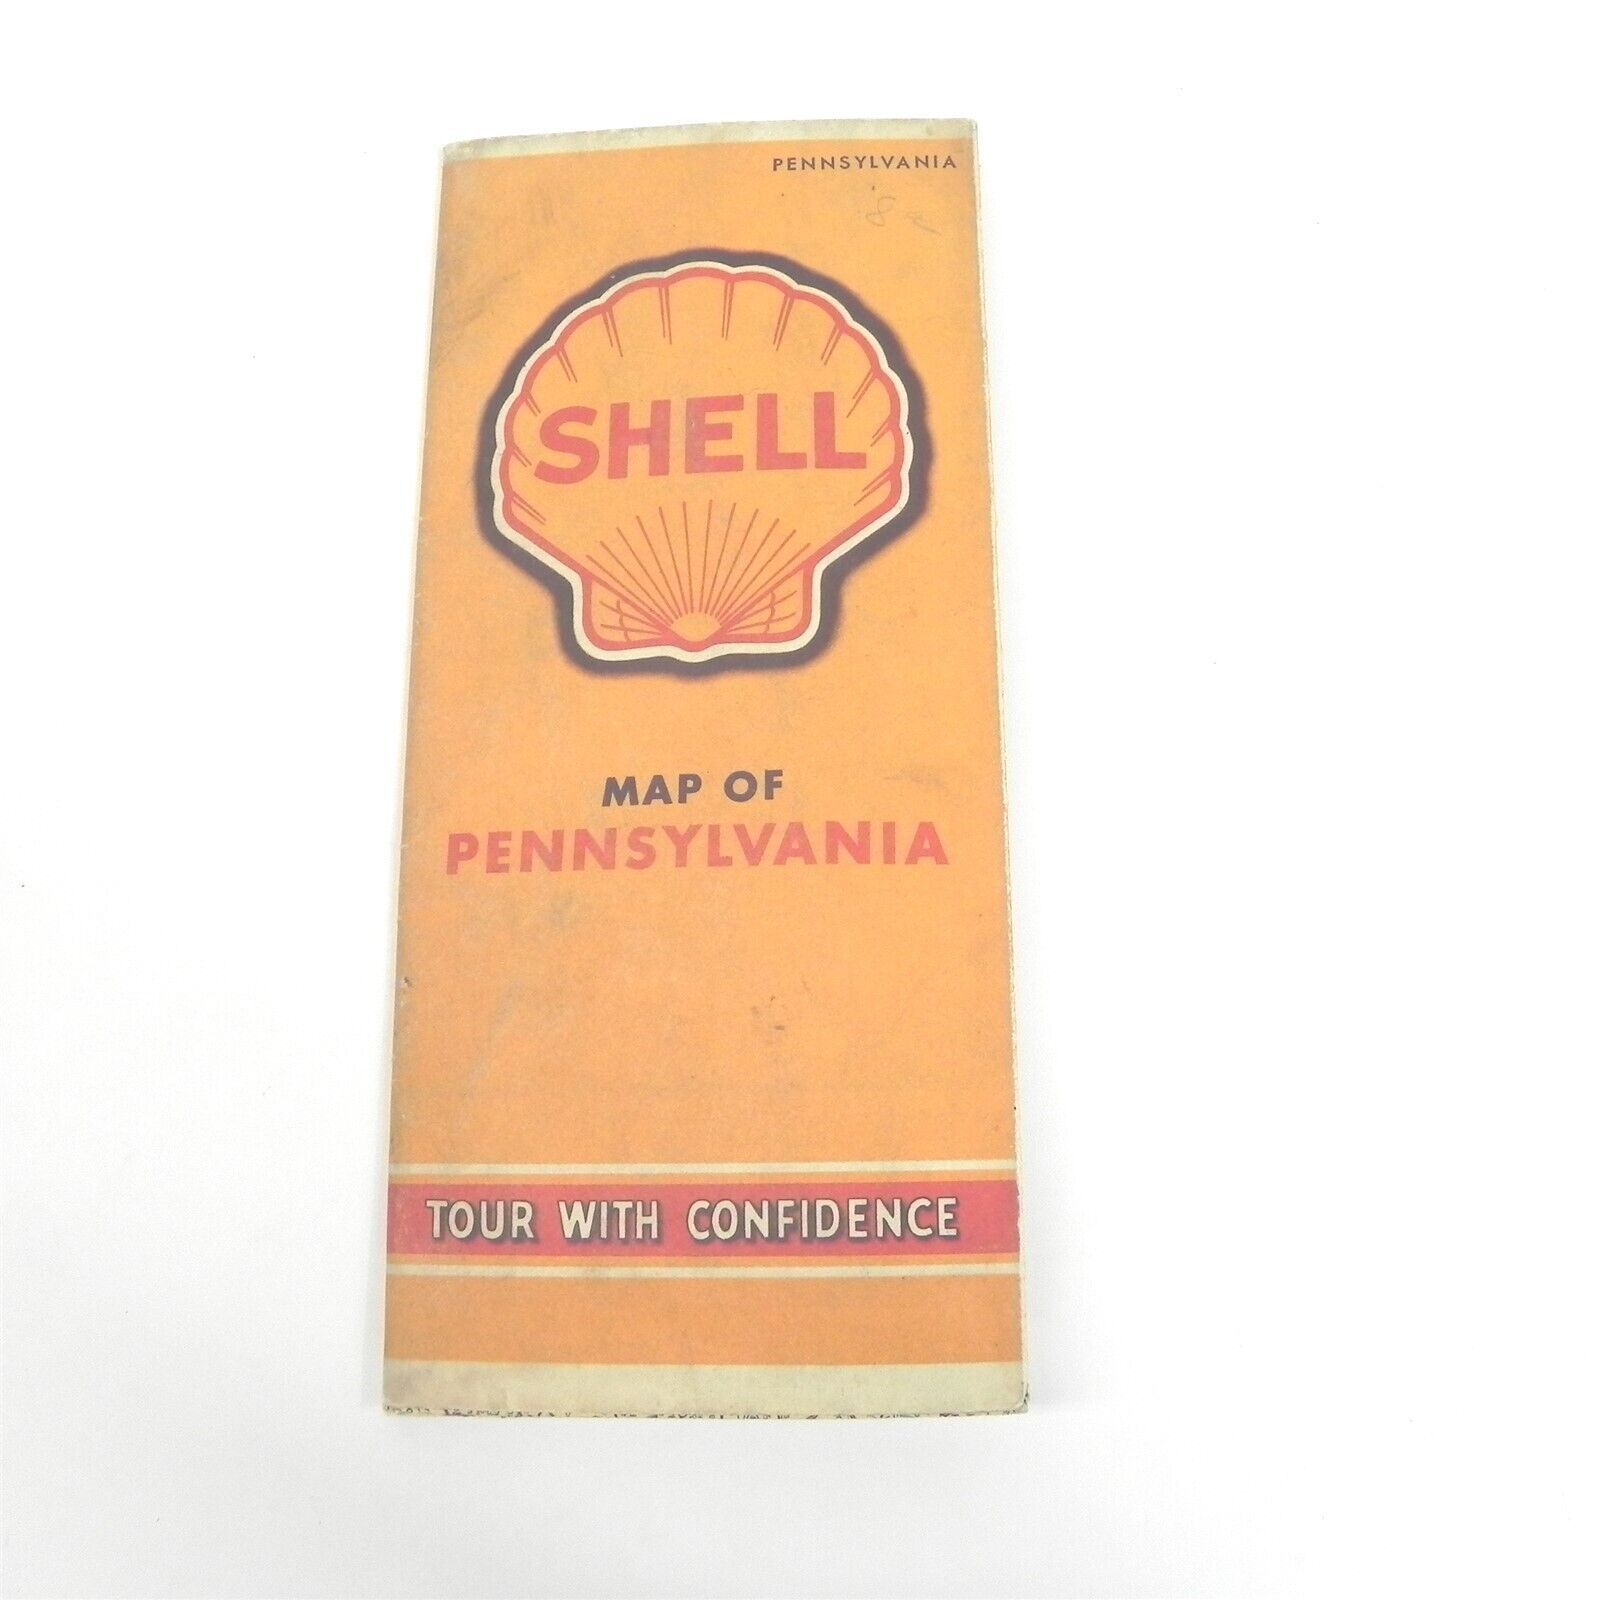 VINTAGE 1942 SHELL OIL COMPANY MAP OF PENNSYLVANIA TOURING GUIDE GAS OIL PROMO